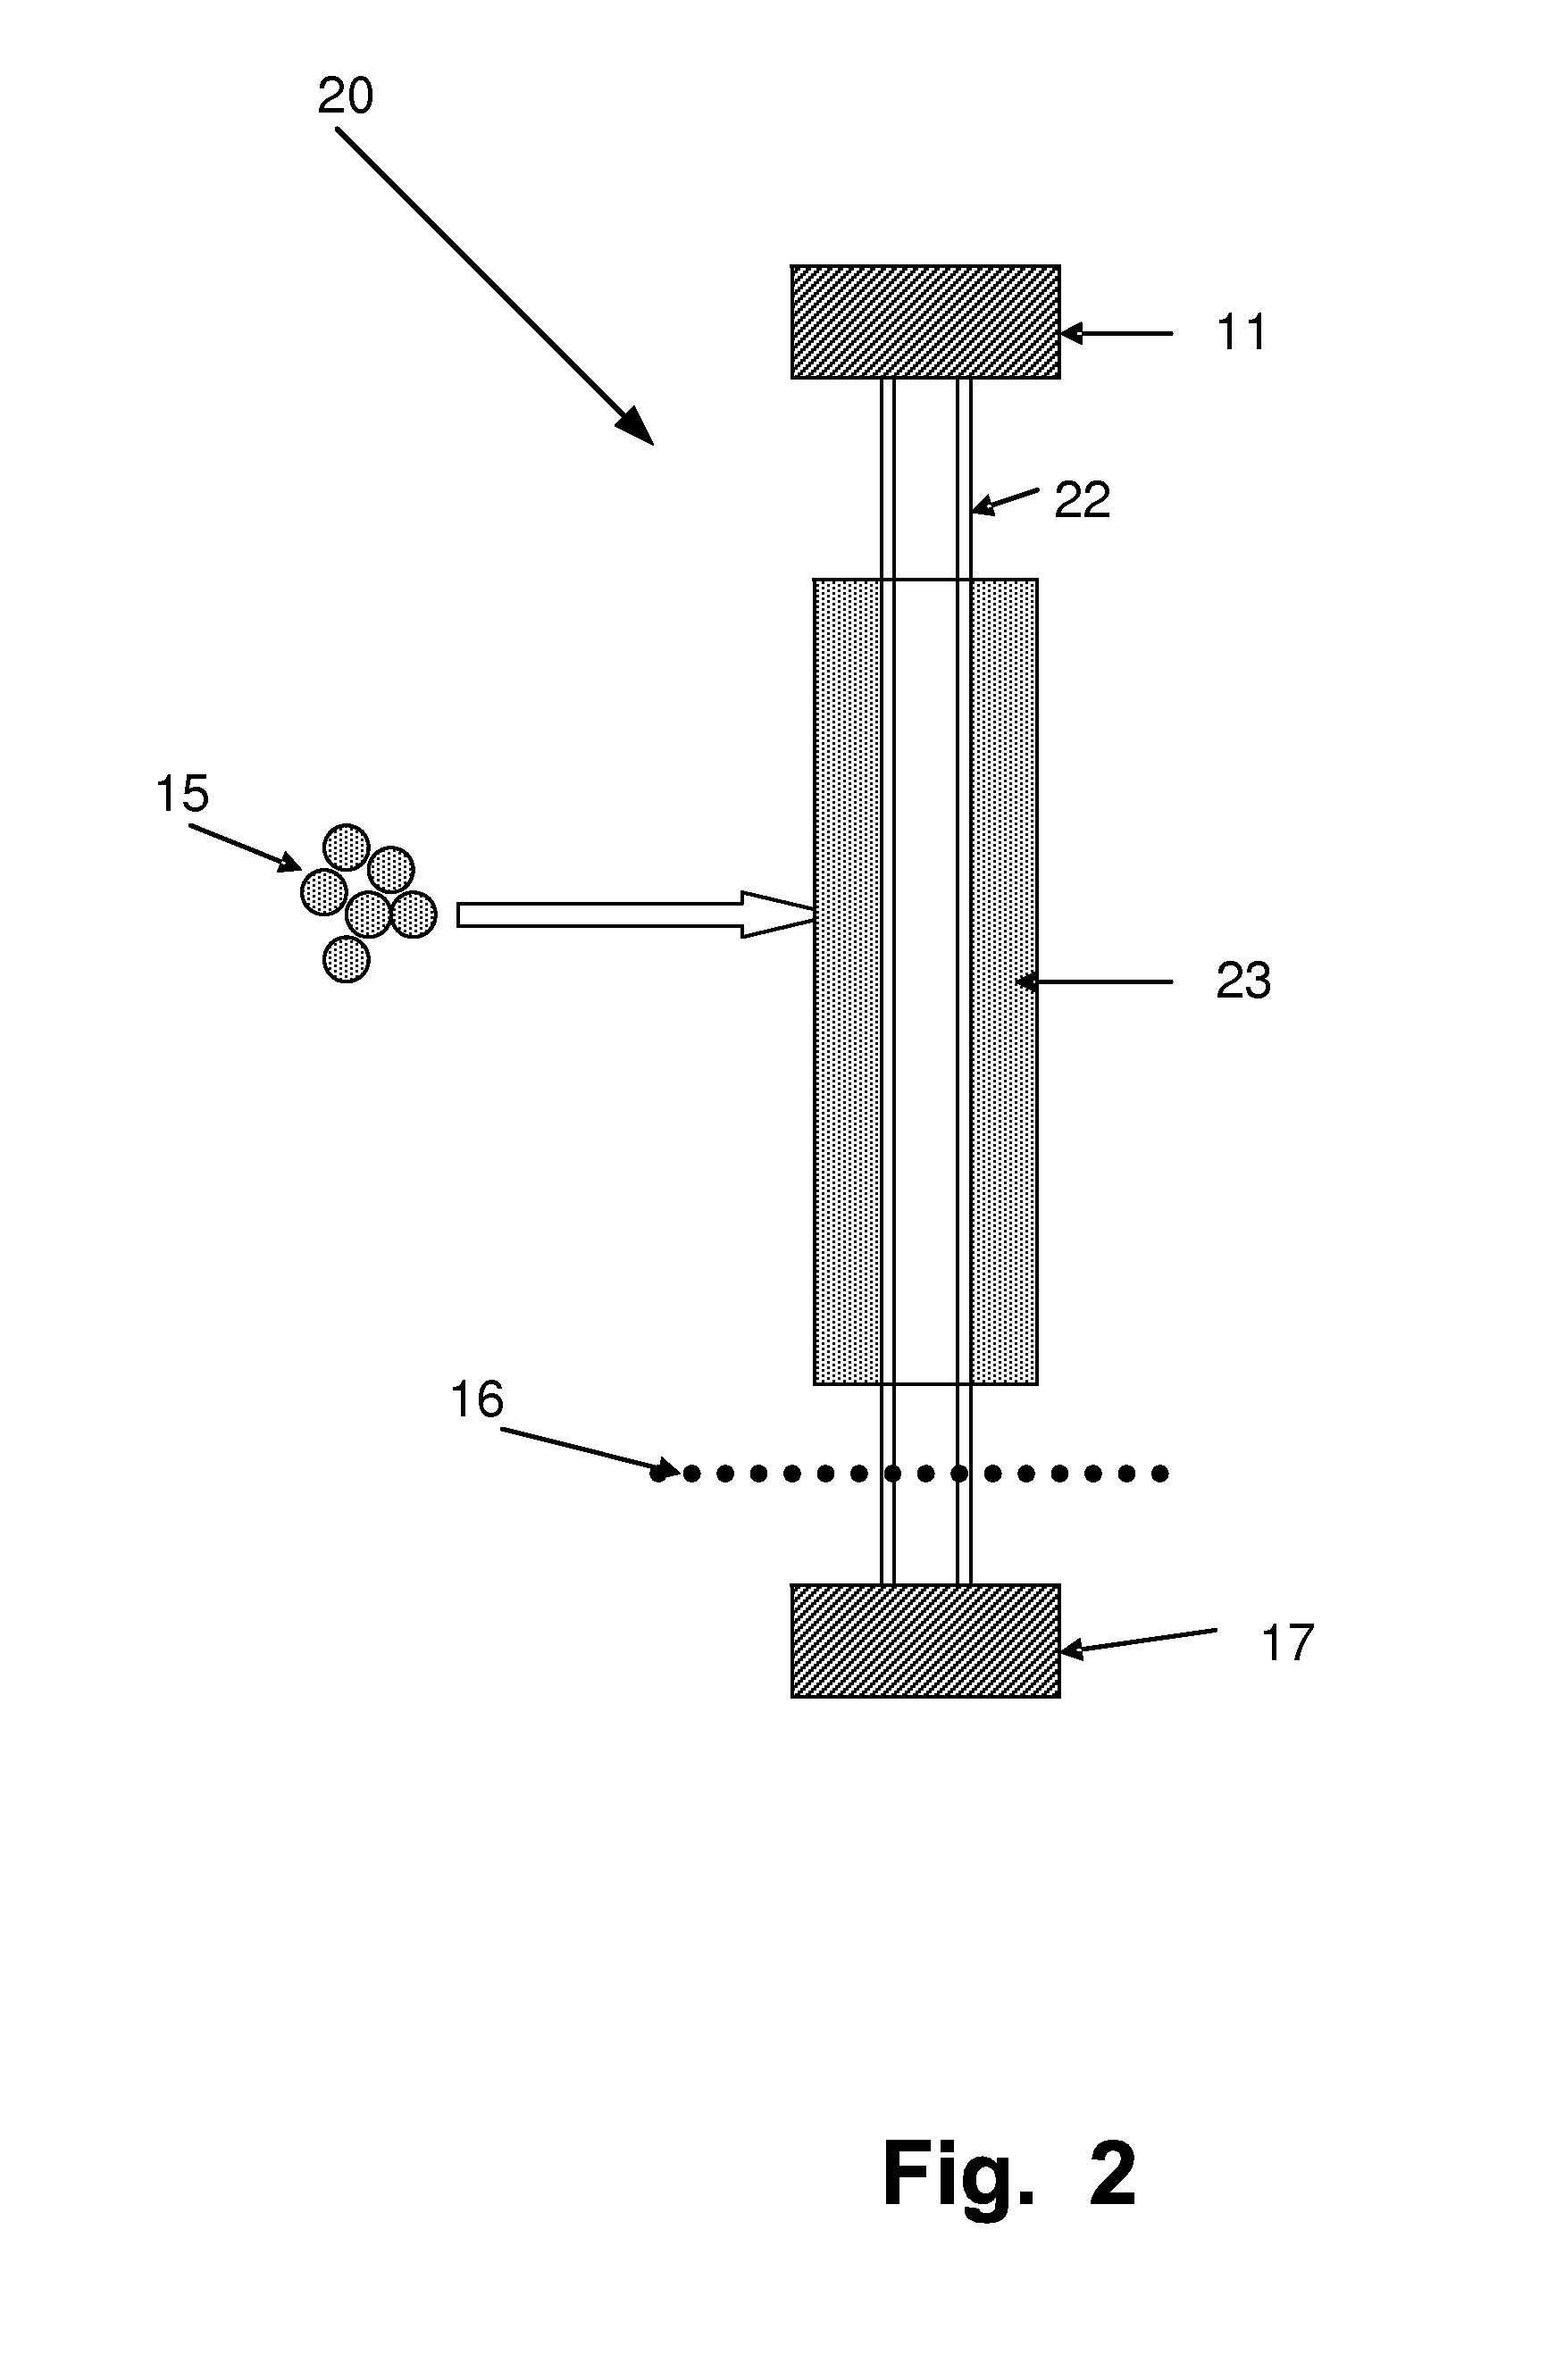 System and Method for Detection of Analytes in Exhaled Breath